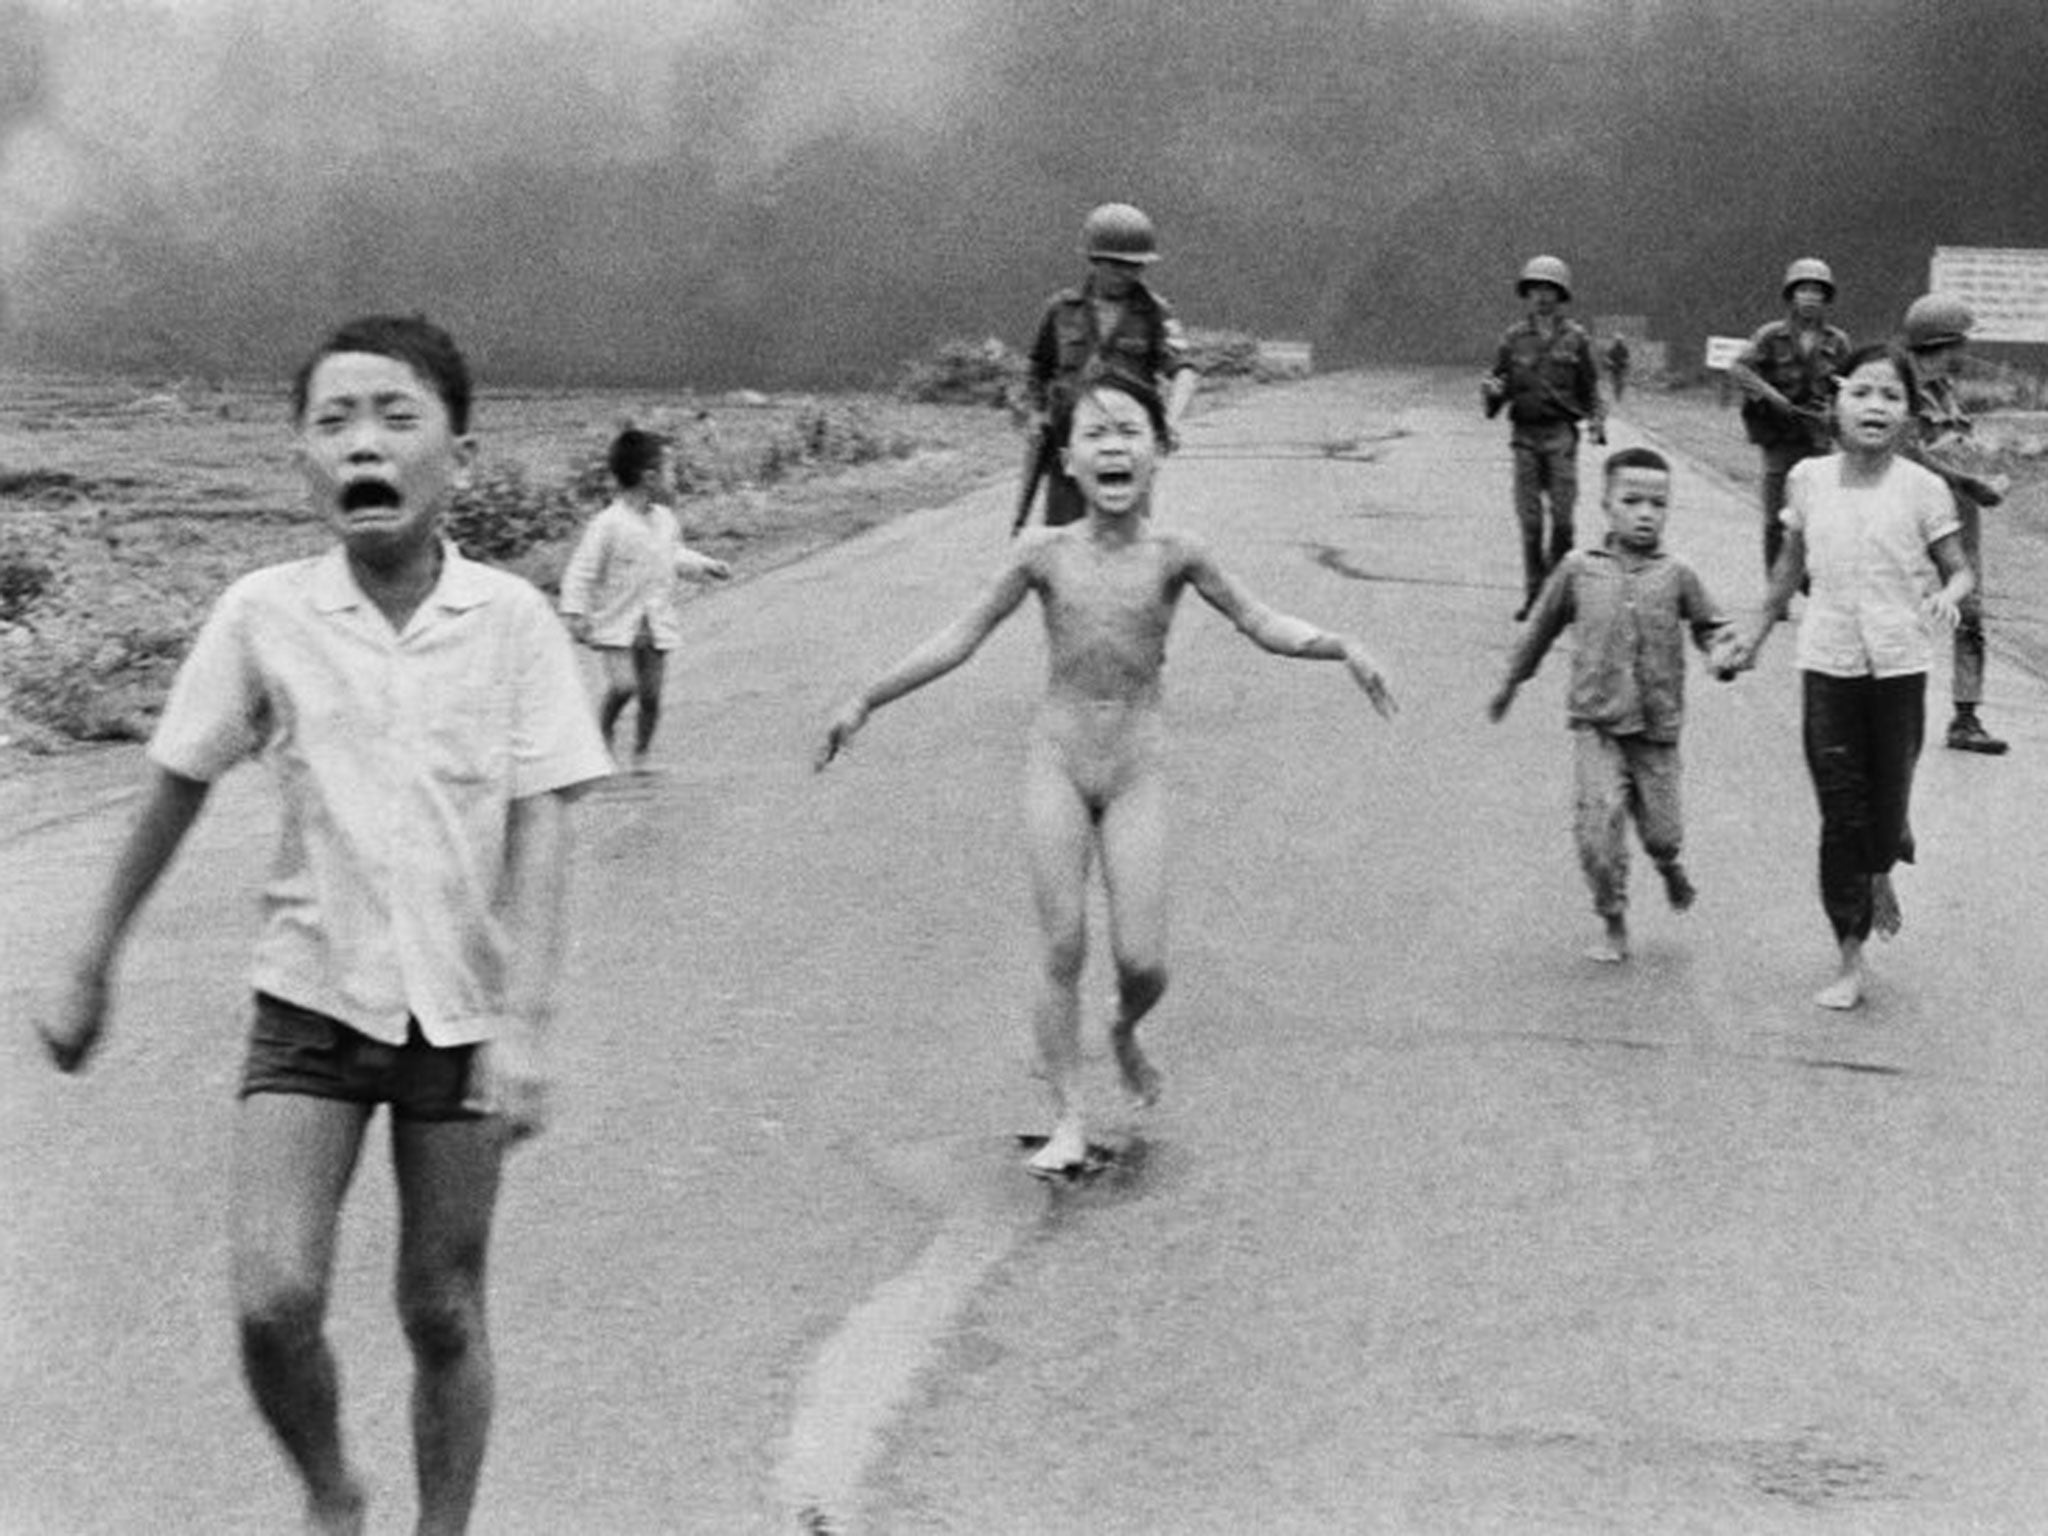 9-year-old Kim Phuc, center, runs with her brothers and cousins, followed by South Vietnamese forces